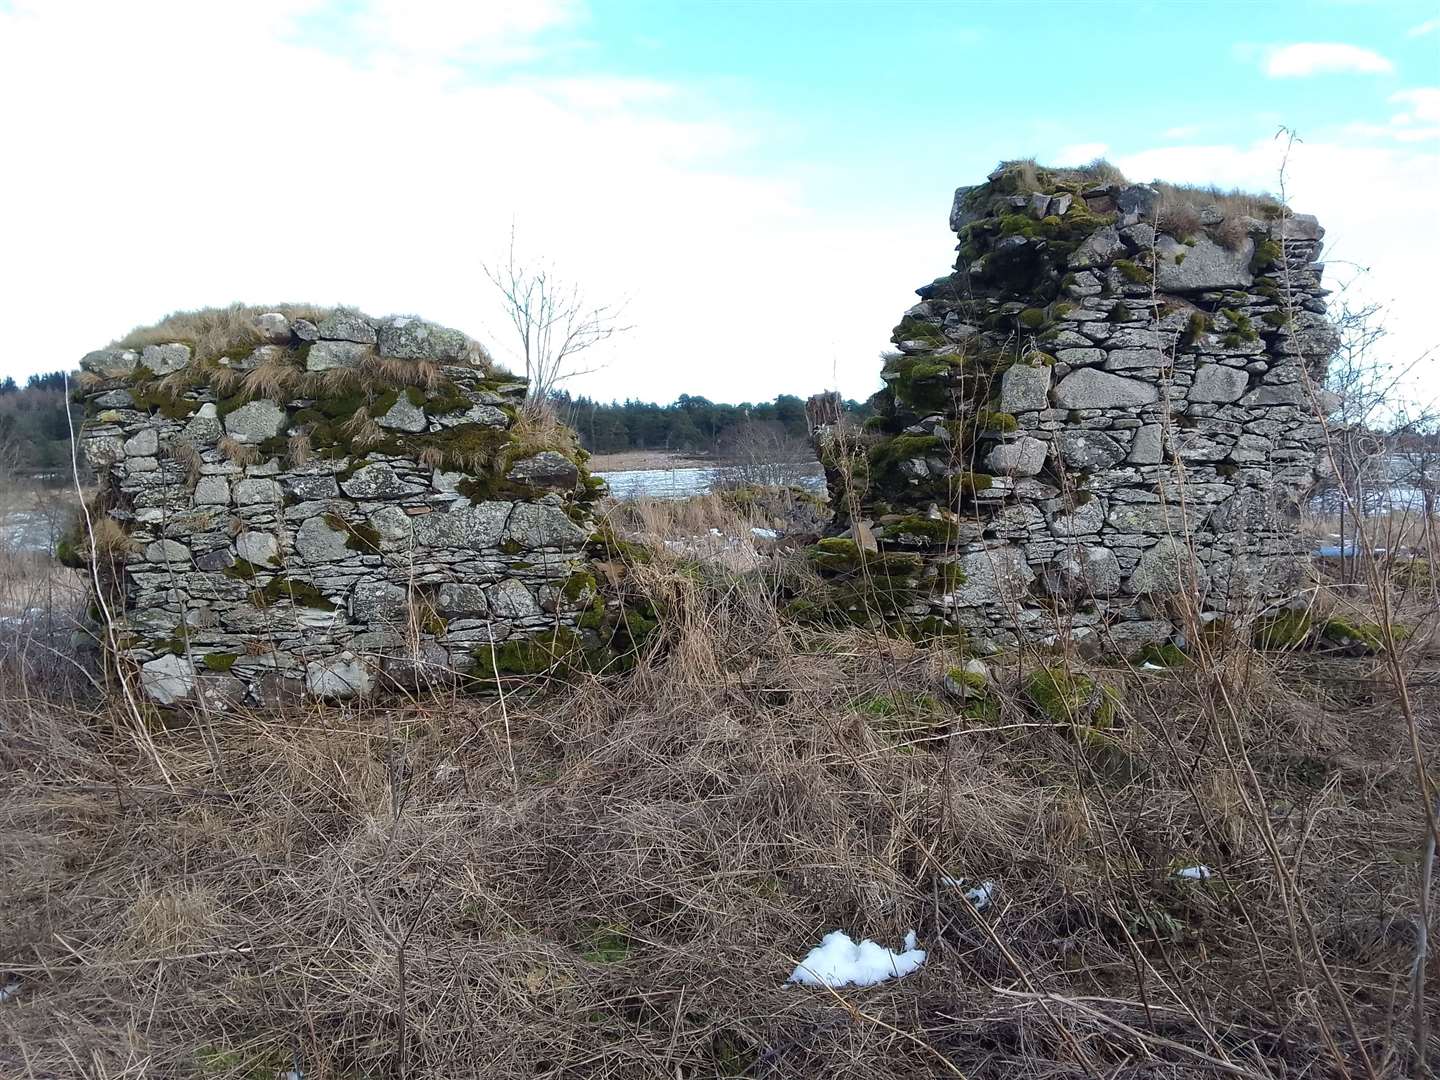 Little is left of the original ruined kirk.